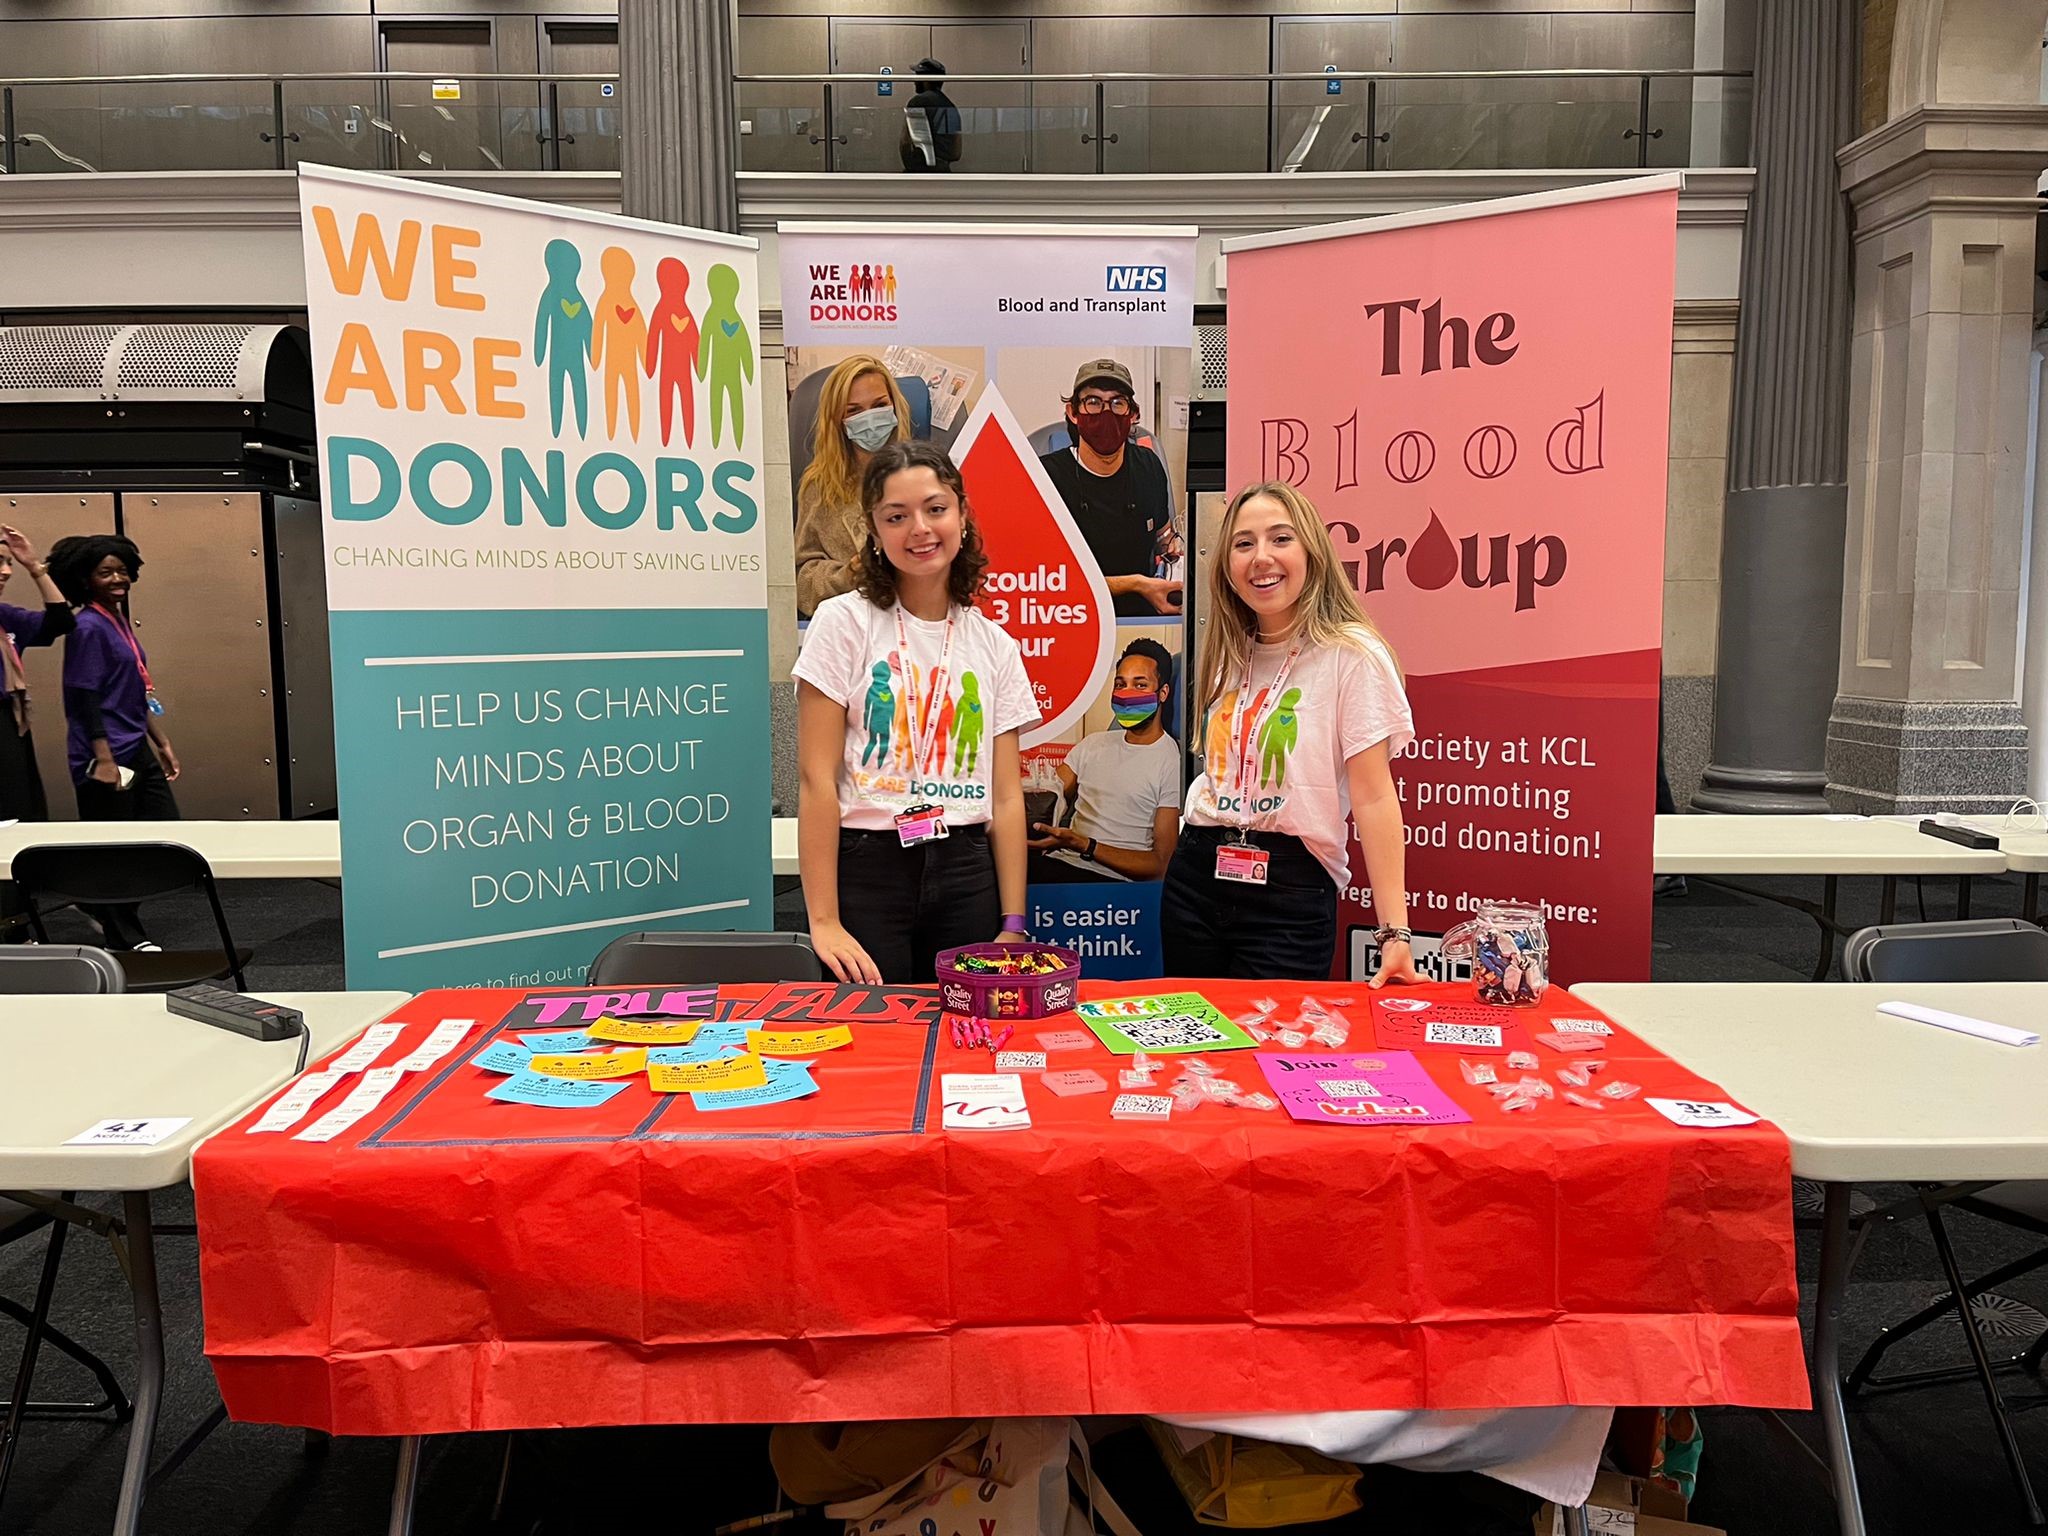 'We Are Donors' stall at King's College University